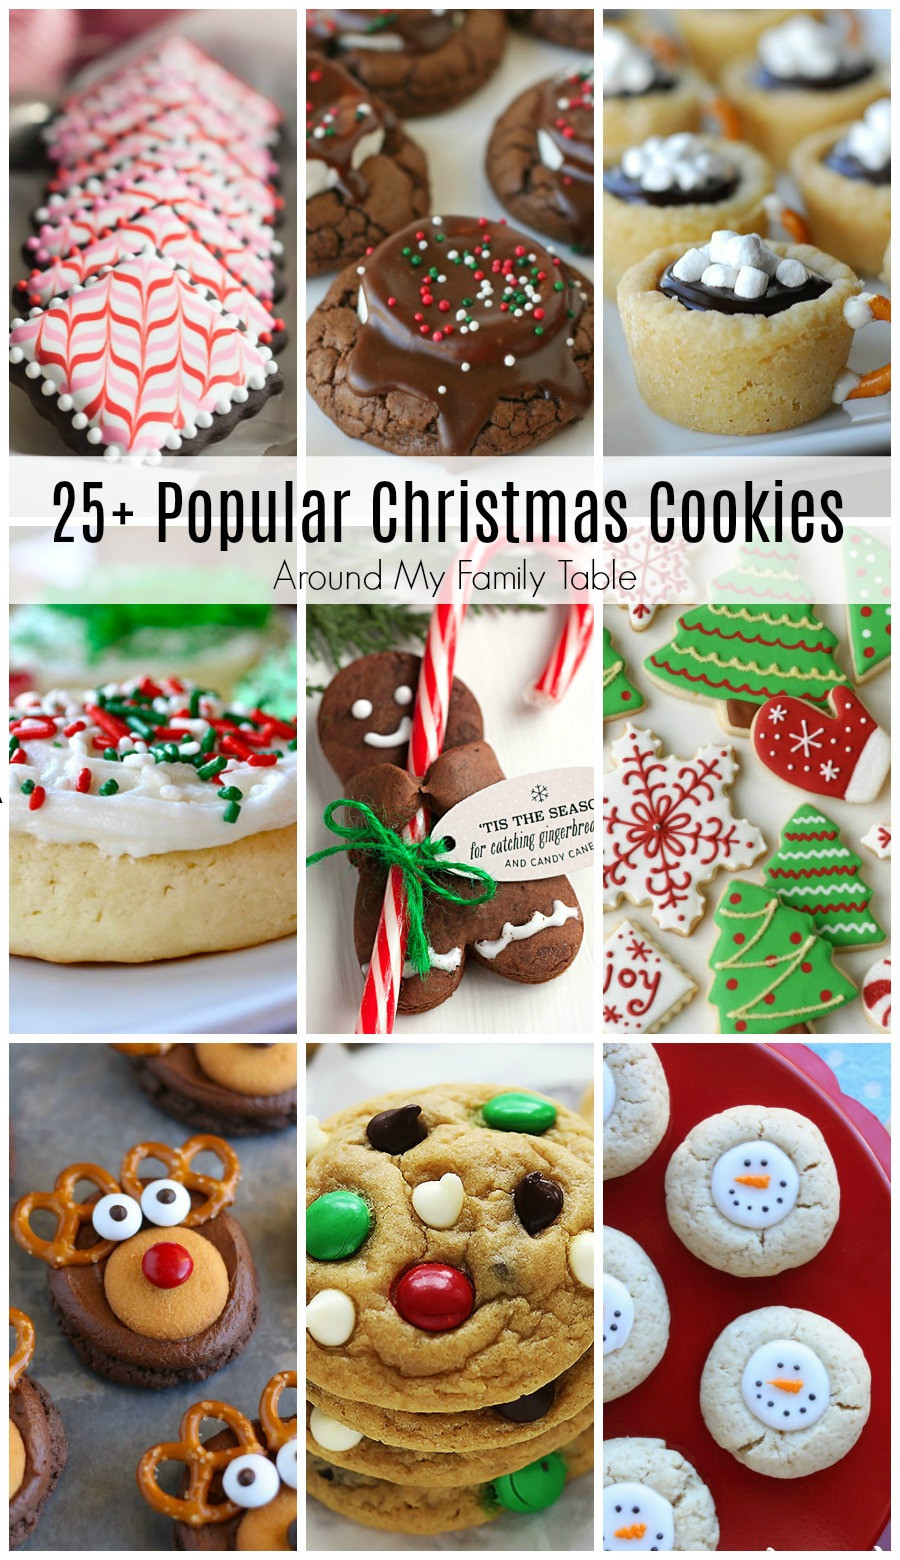 Popular Christmas Cookies
 Most Popular Christmas Cookie Recipes Around My Family Table